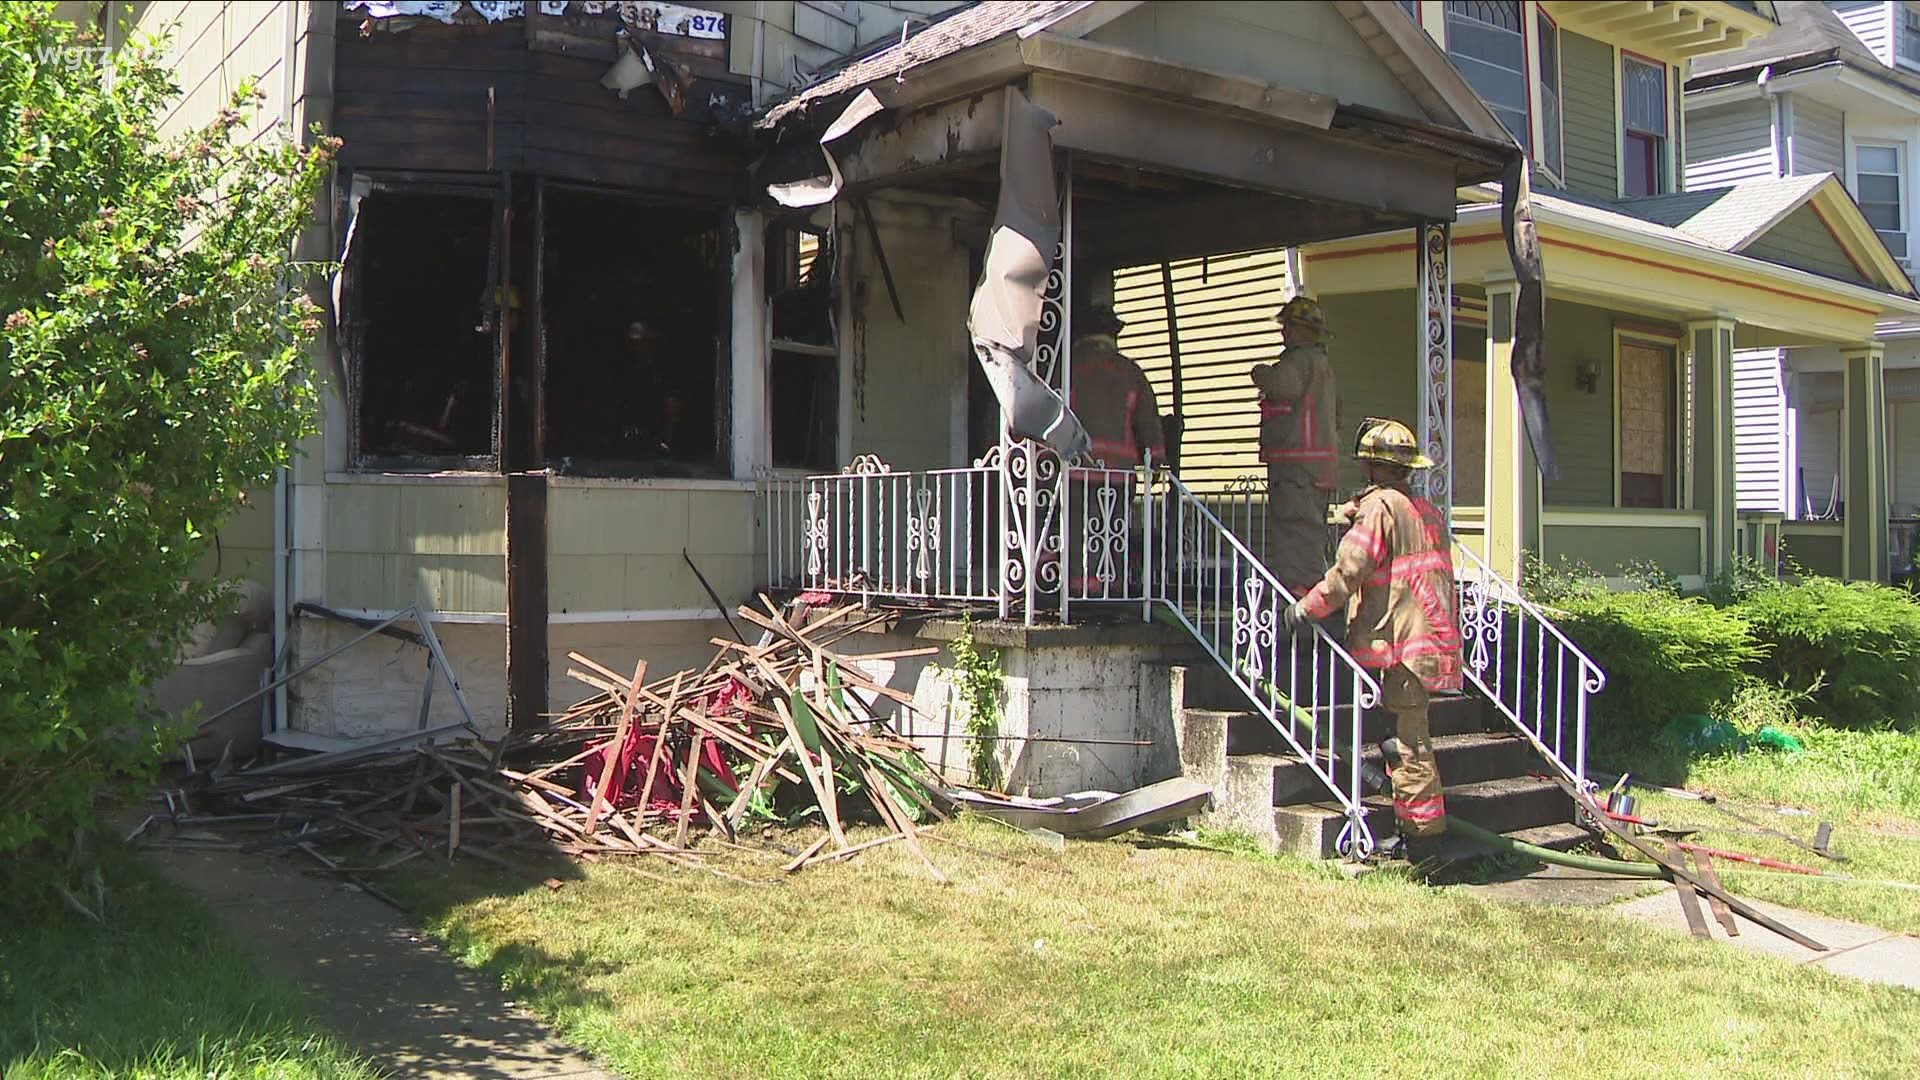 Flames broke out in the two and a half story home during the noon hour Wednesday.